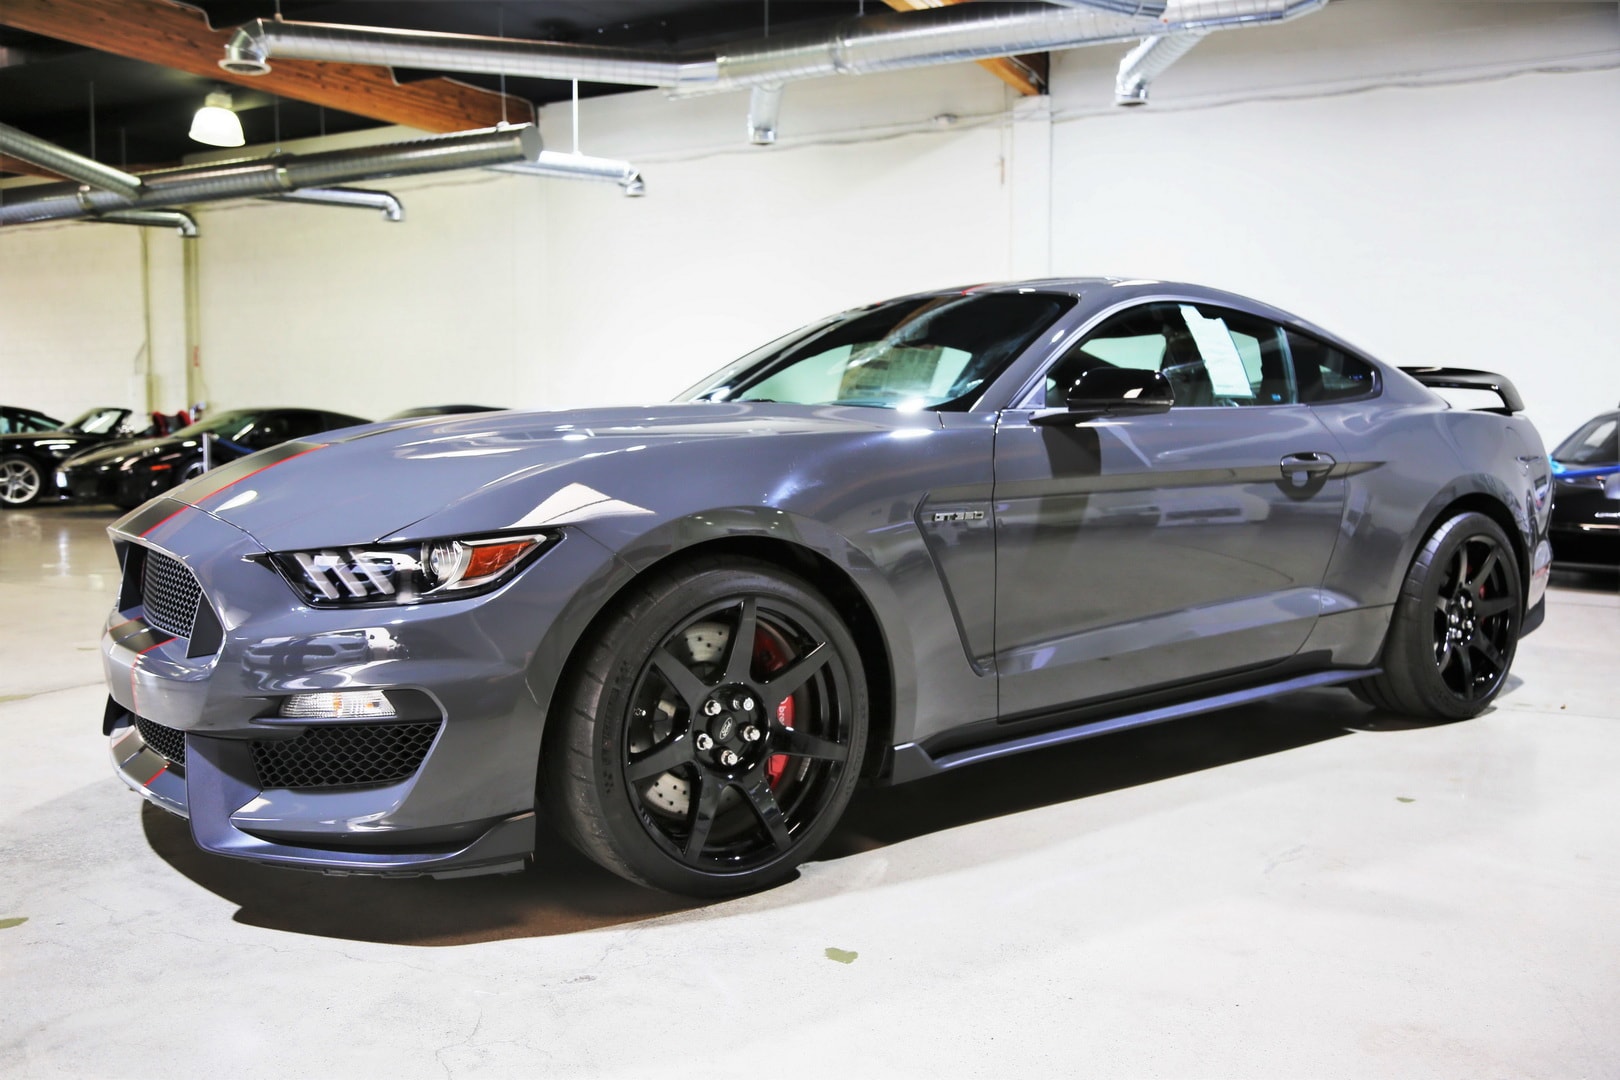 https://s1.cdn.autoevolution.com/images/news/rare-lead-foot-gray-2018-shelby-mustang-gt350r-with-delivery-miles-up-for-grabs-156590_1.jpg